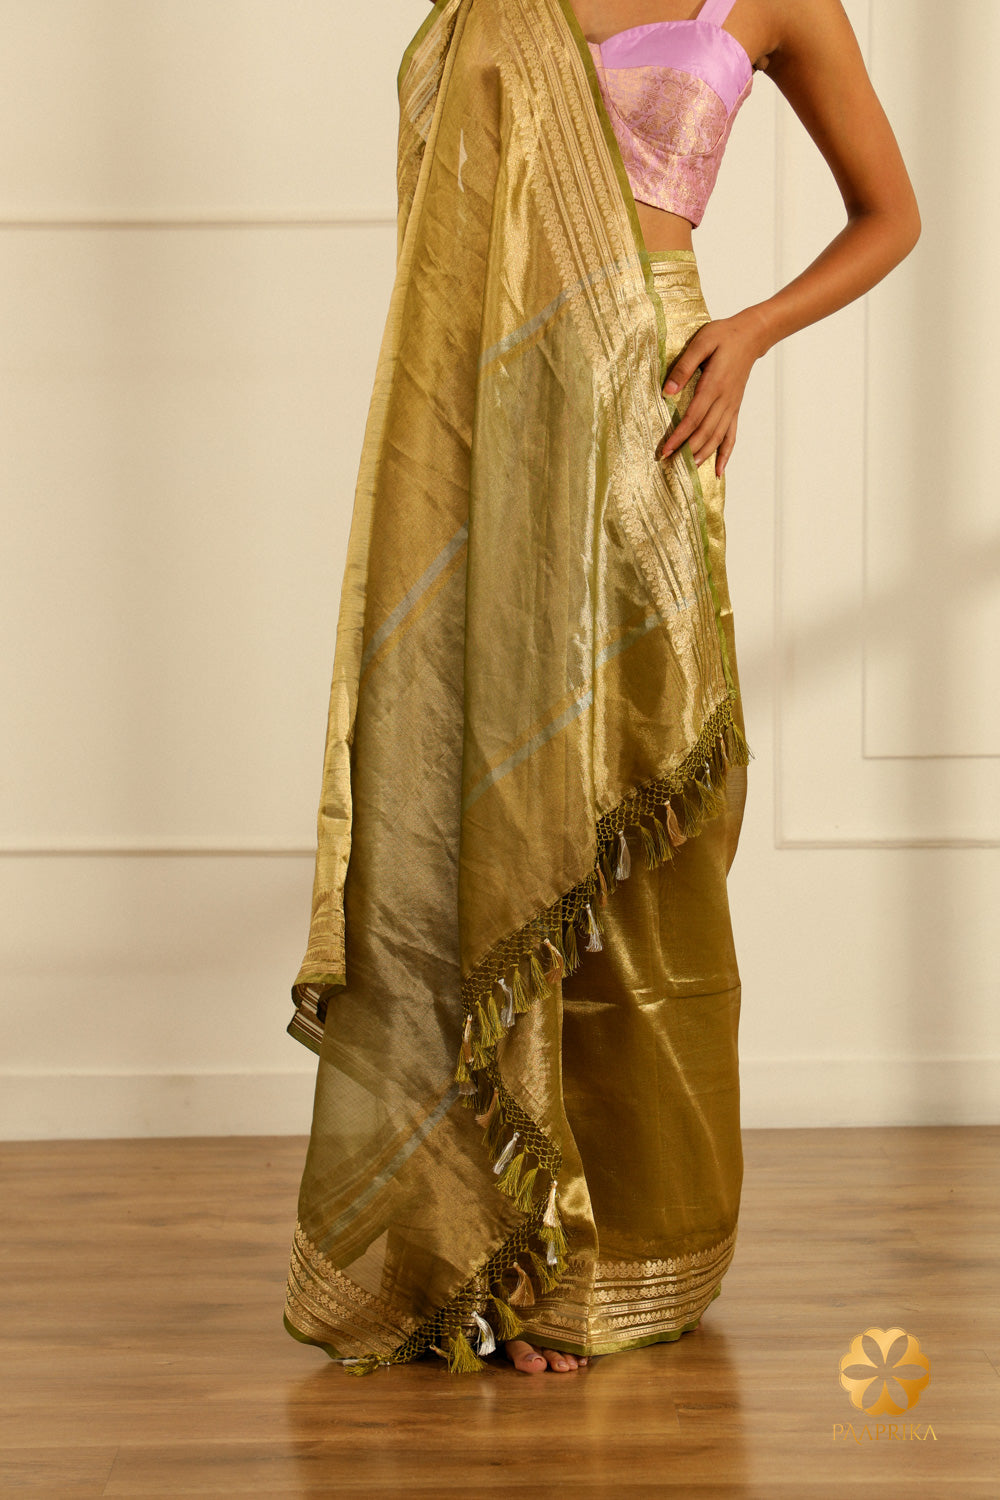 Close-up of Exquisite Floral-Detailed Border on Olive Green Saree